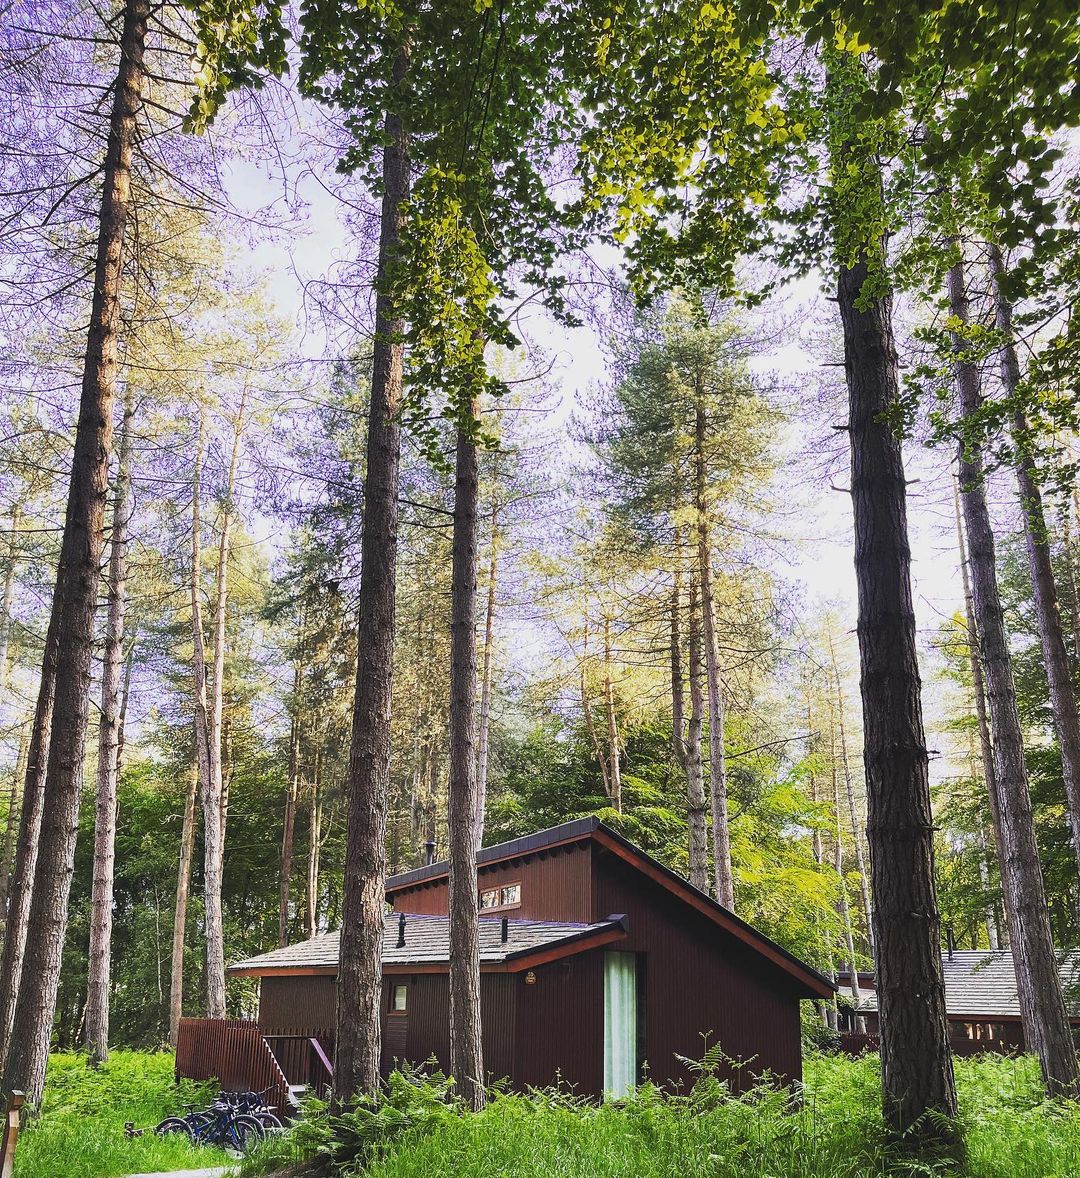 It's amazing what a few days in nature can do 🌿 Do you have a visit planned soon? 📍 Delamere Forest, Cheshire 📸 sjwilson81 #forestfeeling #cabininthewoods #traveltuesday